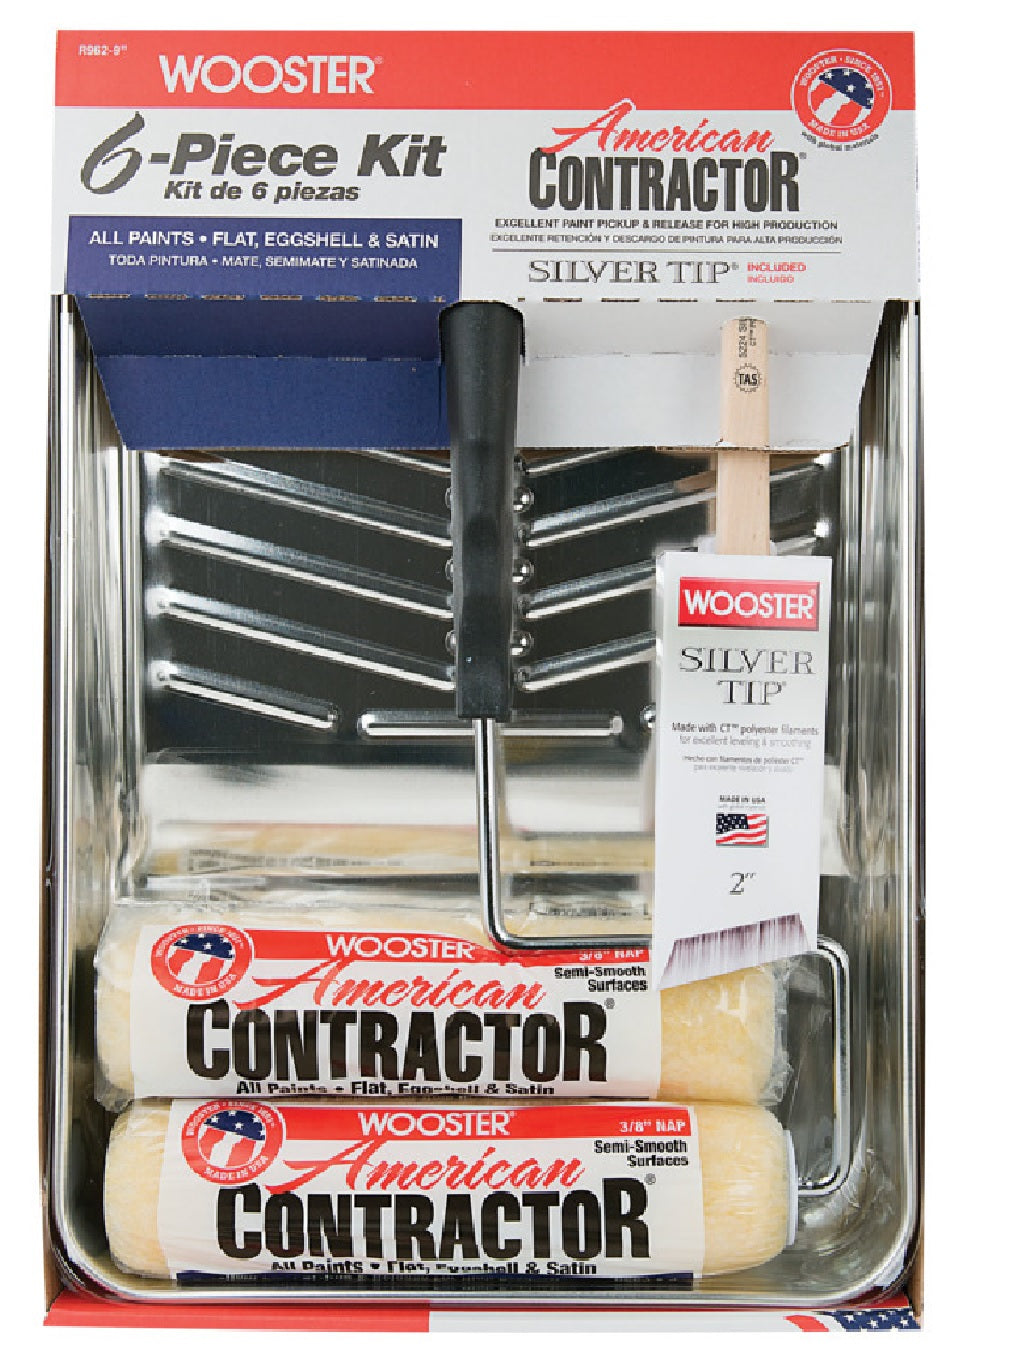 Wooster R962-9 American Contractor Roller Kit, 6 Piece